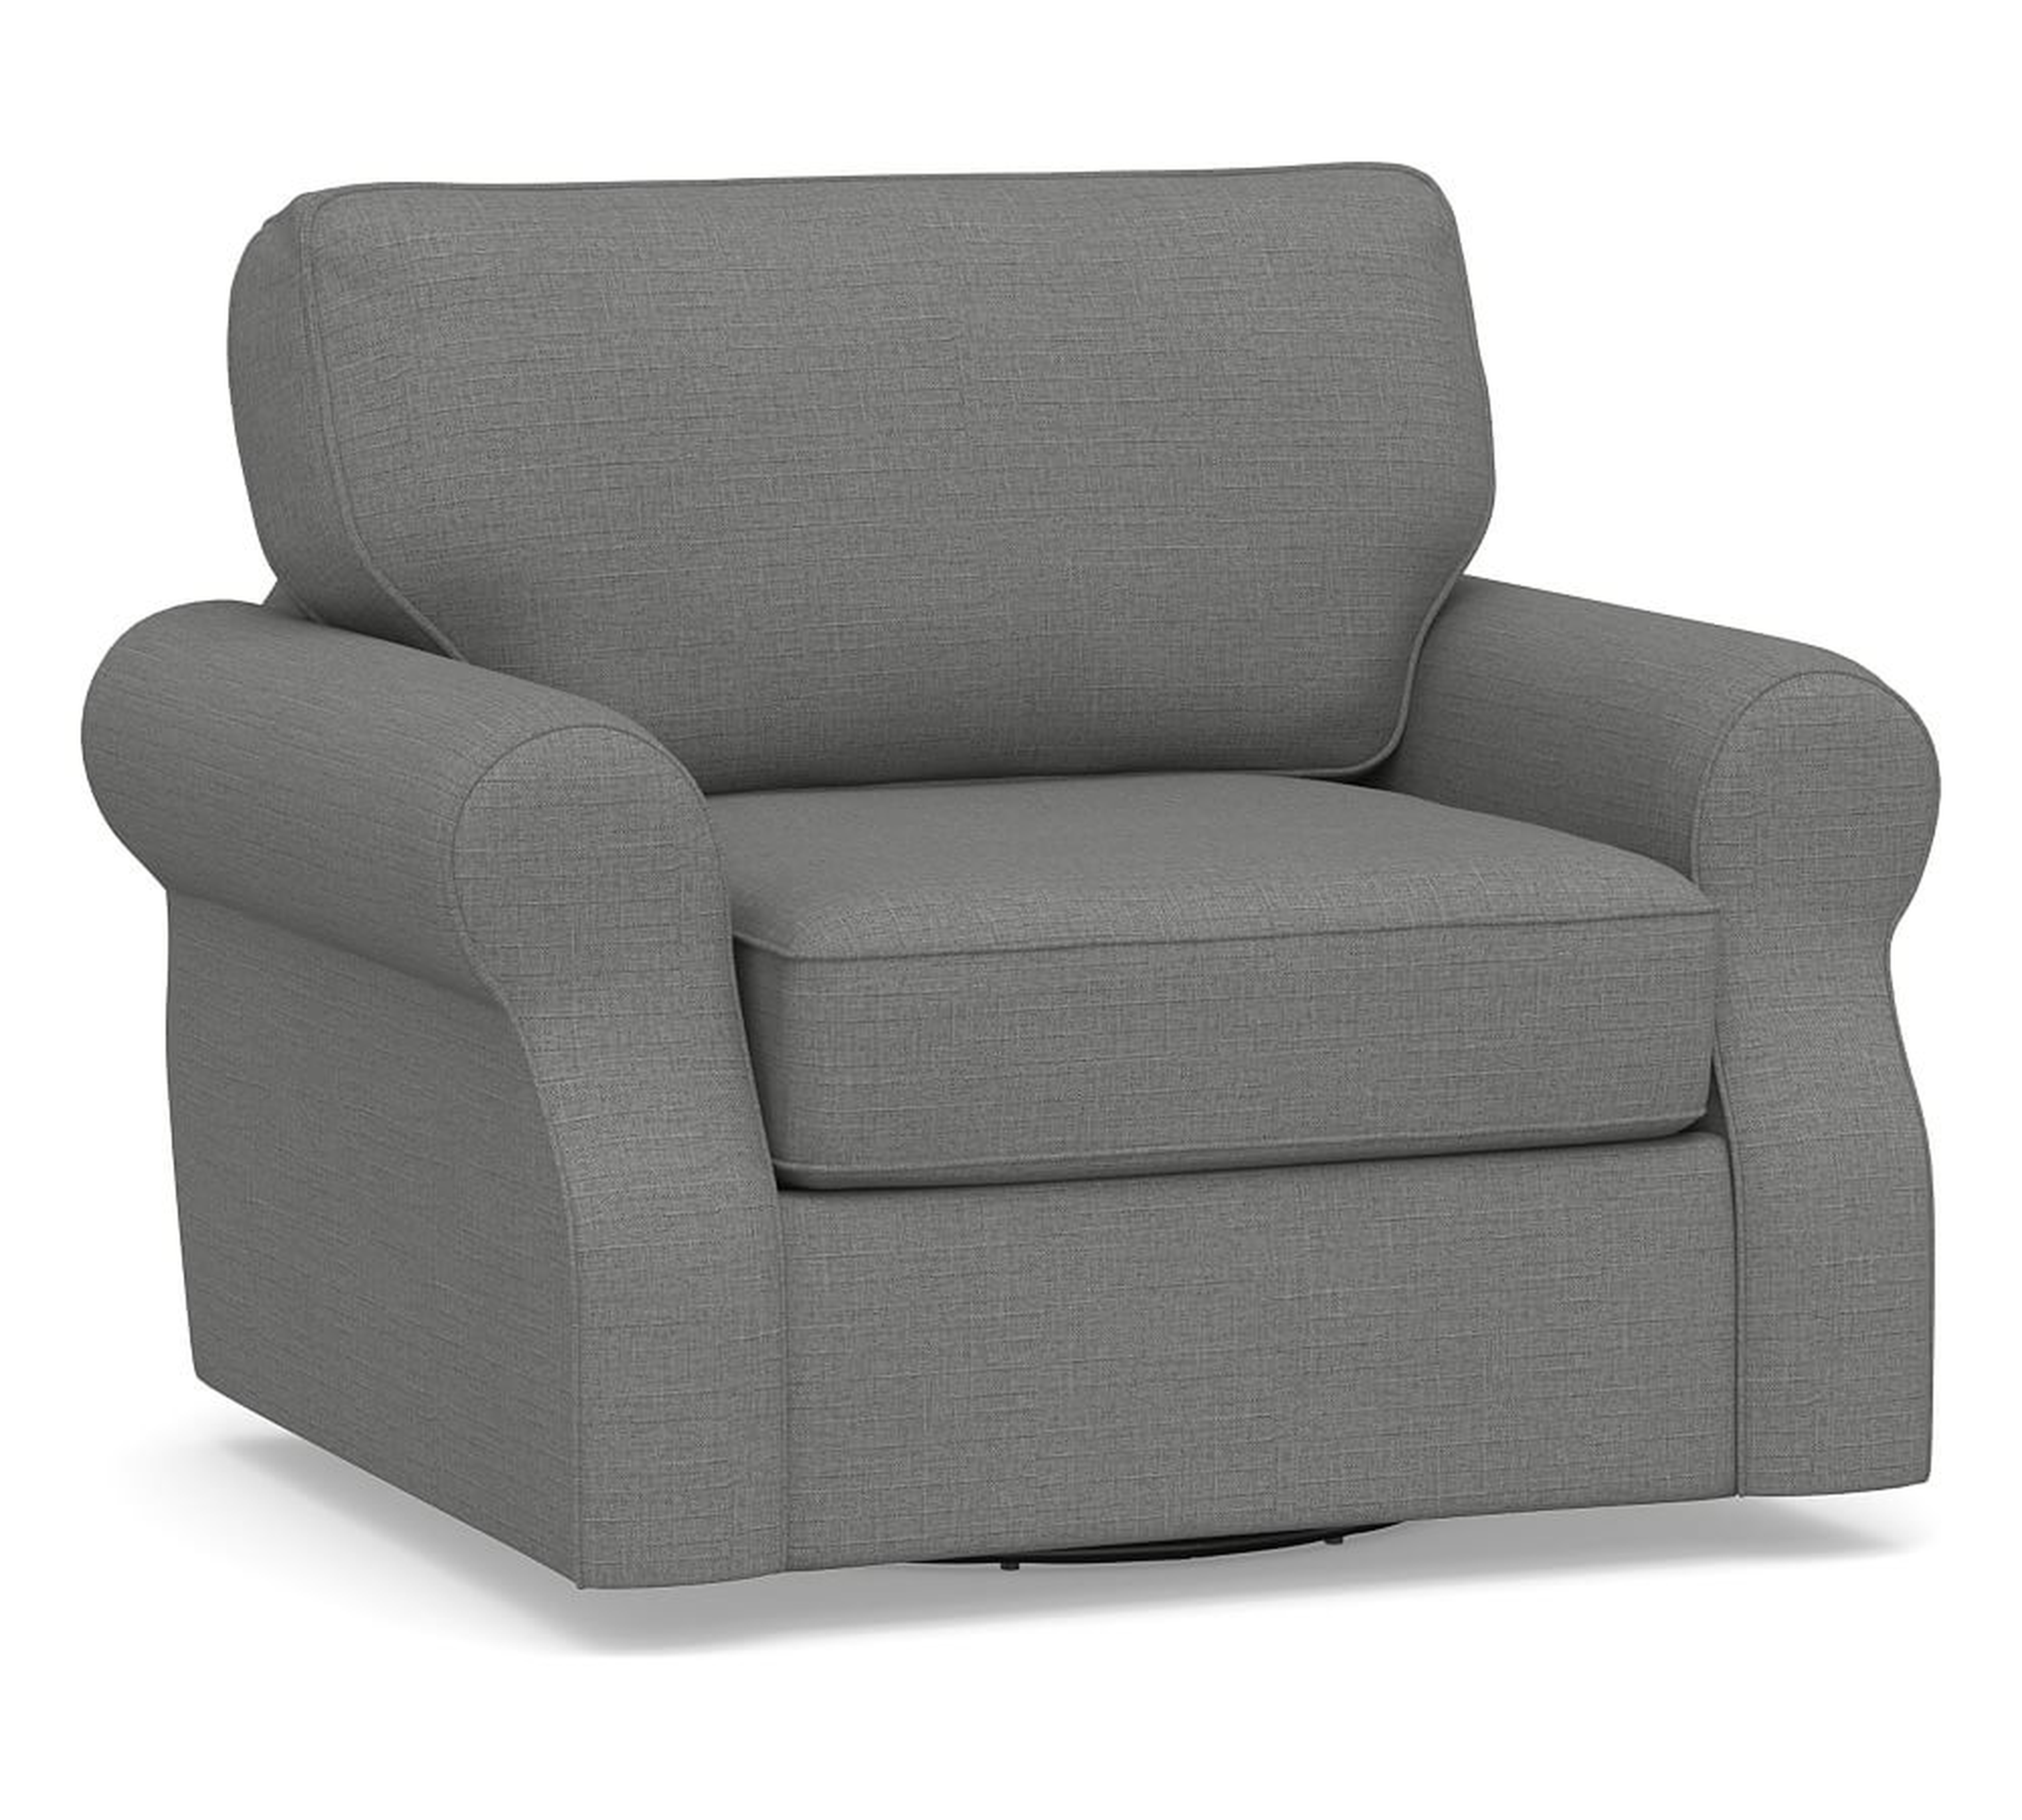 SoMa Fremont Roll Arm Upholstered Swivel Armchair, Polyester Wrapped Cushions, Basketweave Slub Charcoal - Pottery Barn